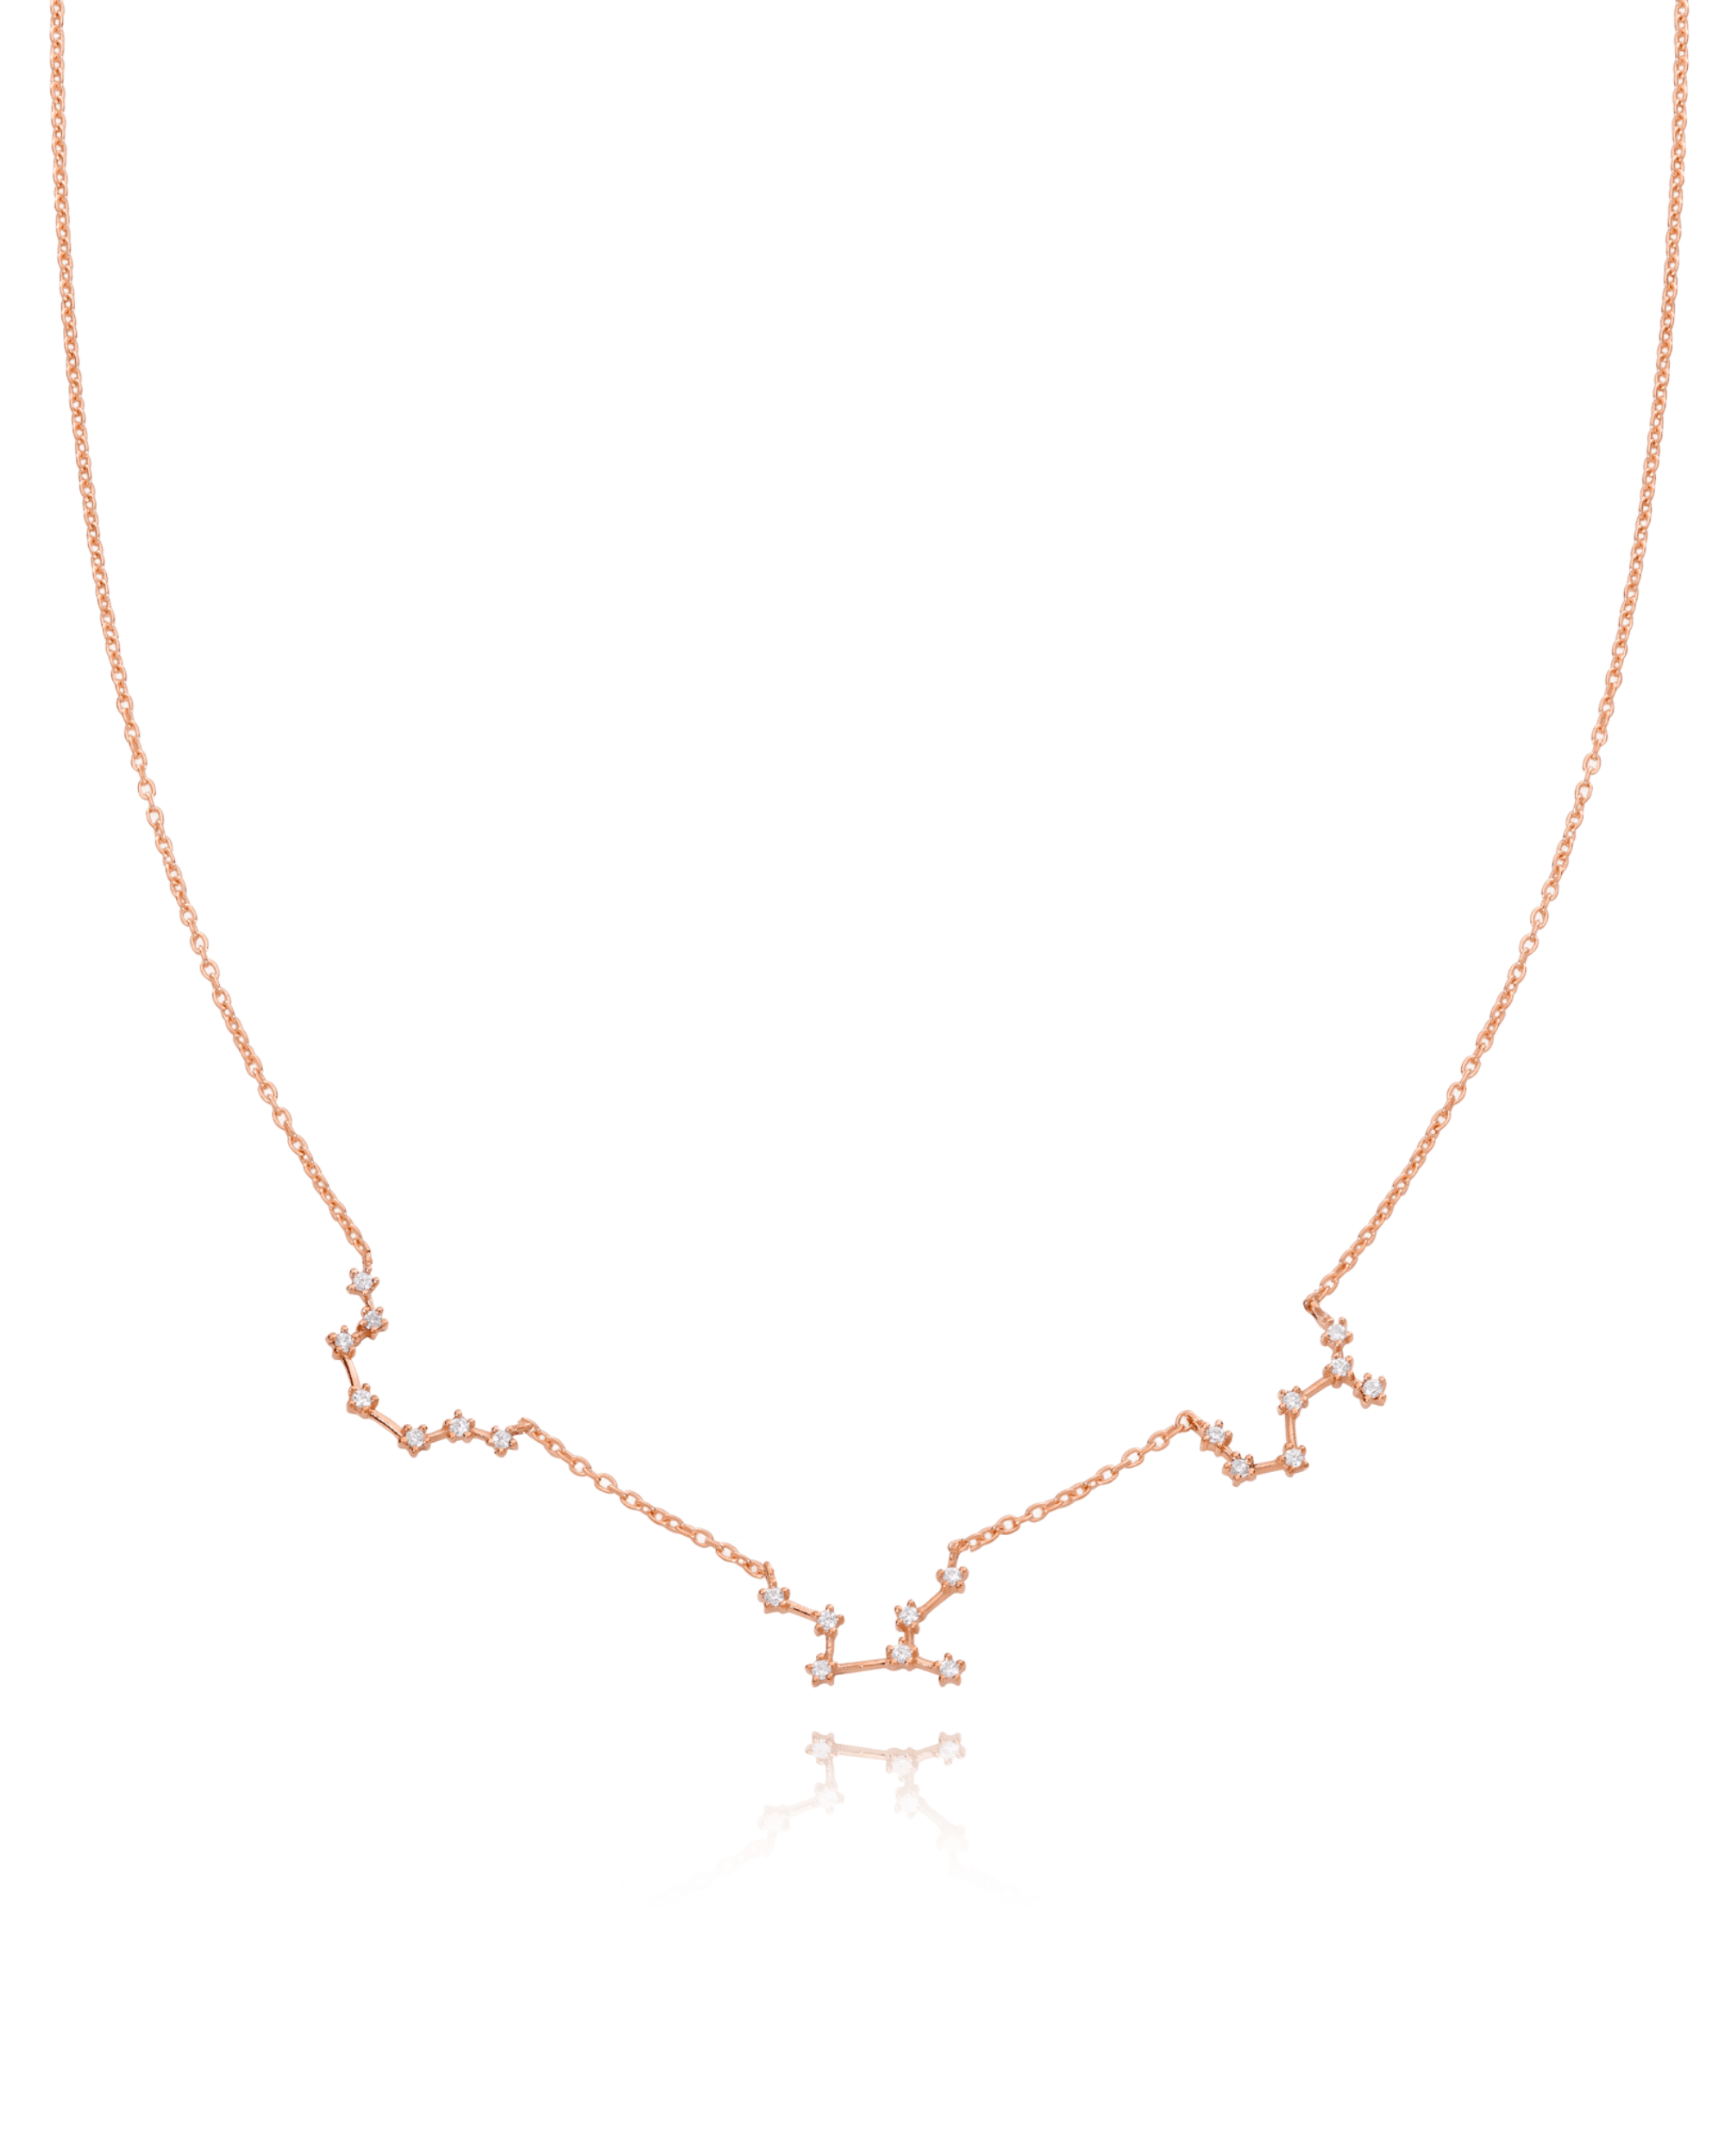 Constellation Necklace with Diamonds - 18K Rose Vermeil Necklaces magal-dev 1 Constellation 16" 